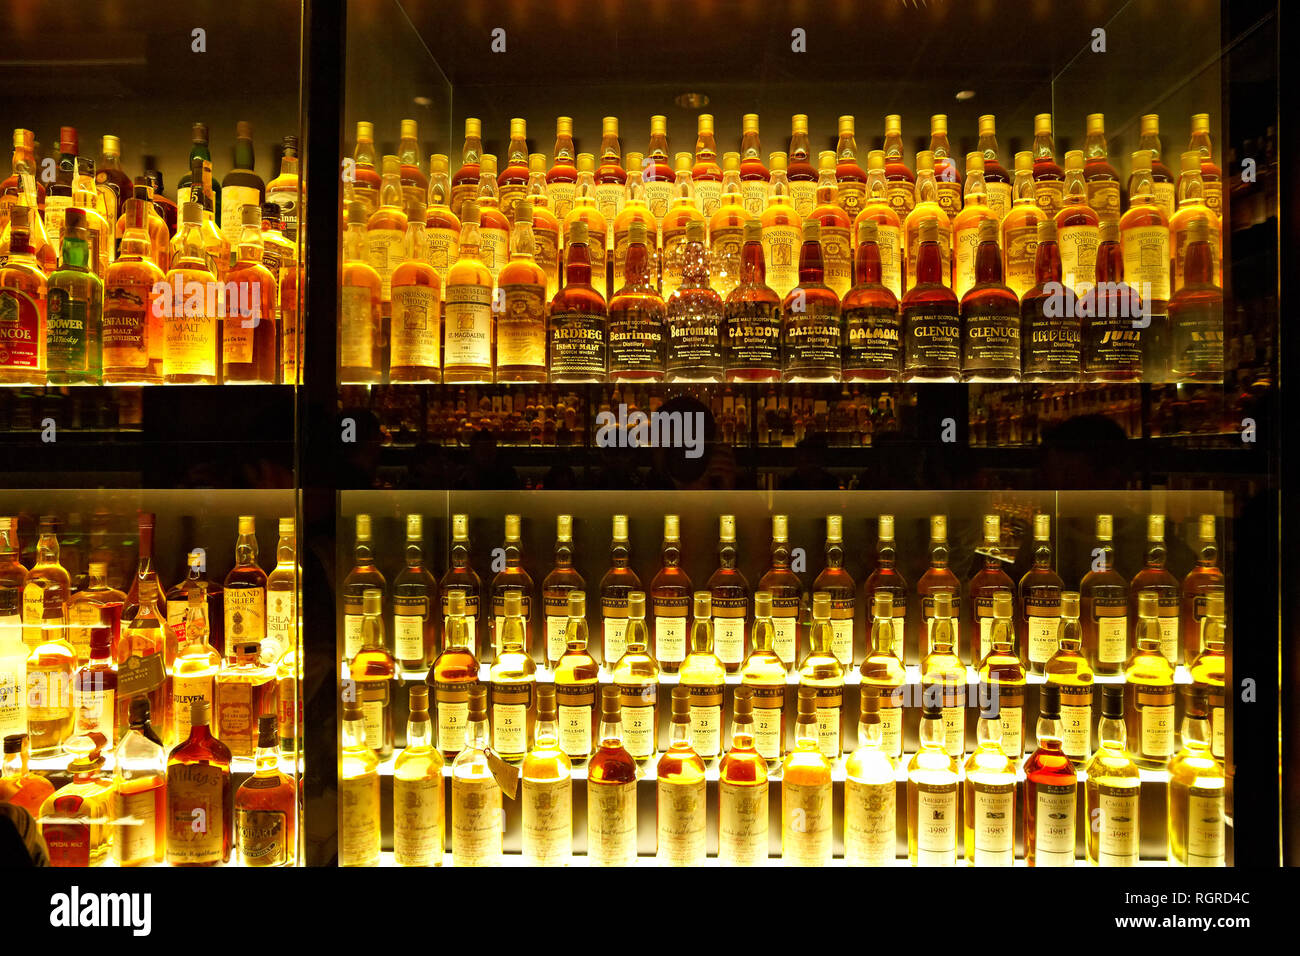 The largest Scotch Whisky collection in the world Stock Photo